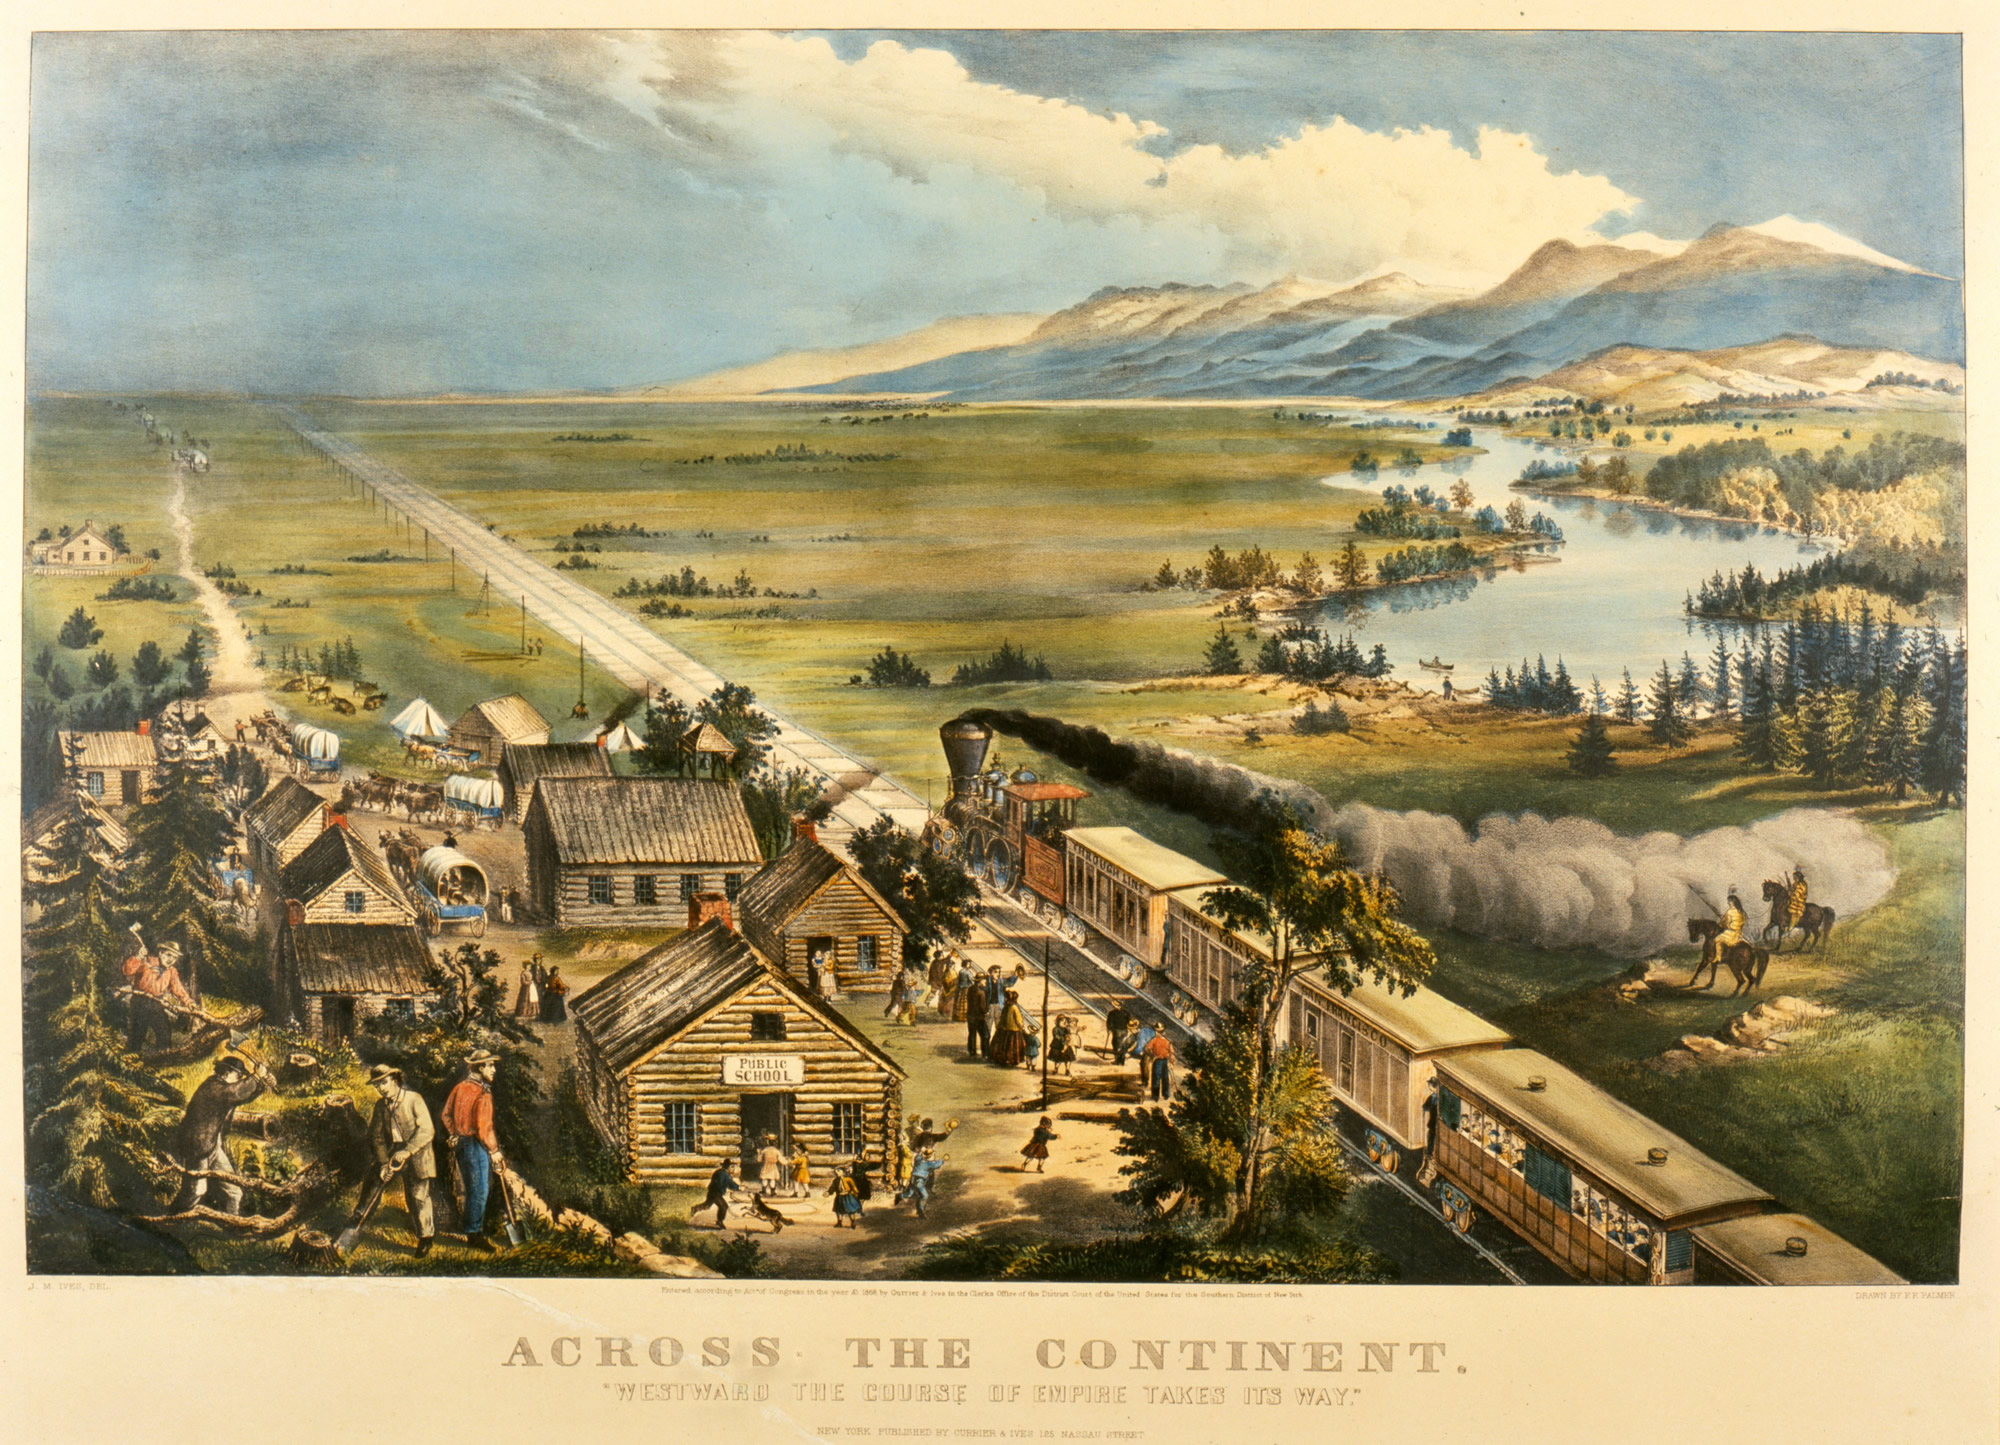 Across the Continent, Lithograph, Frances F. Palmer, 1869.